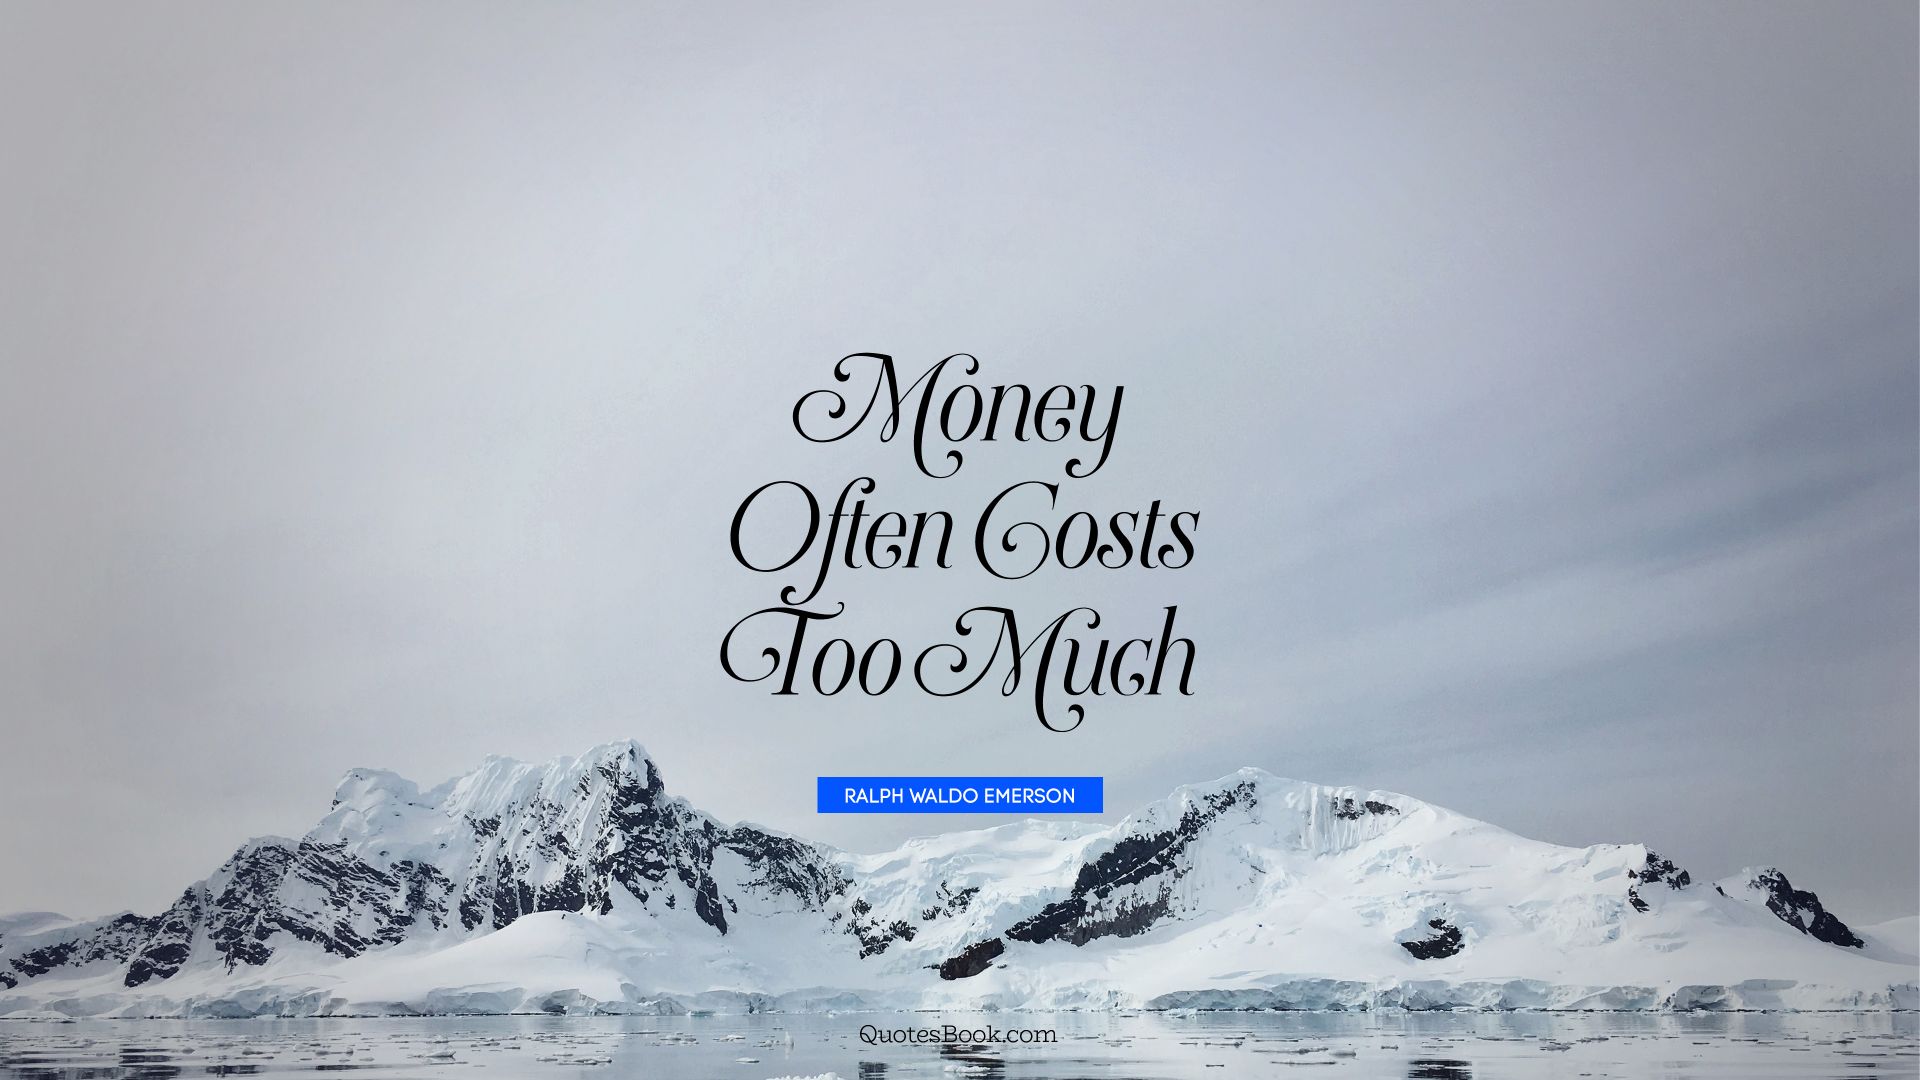 Money often costs too much. - Quote by Ralph Waldo Emerson